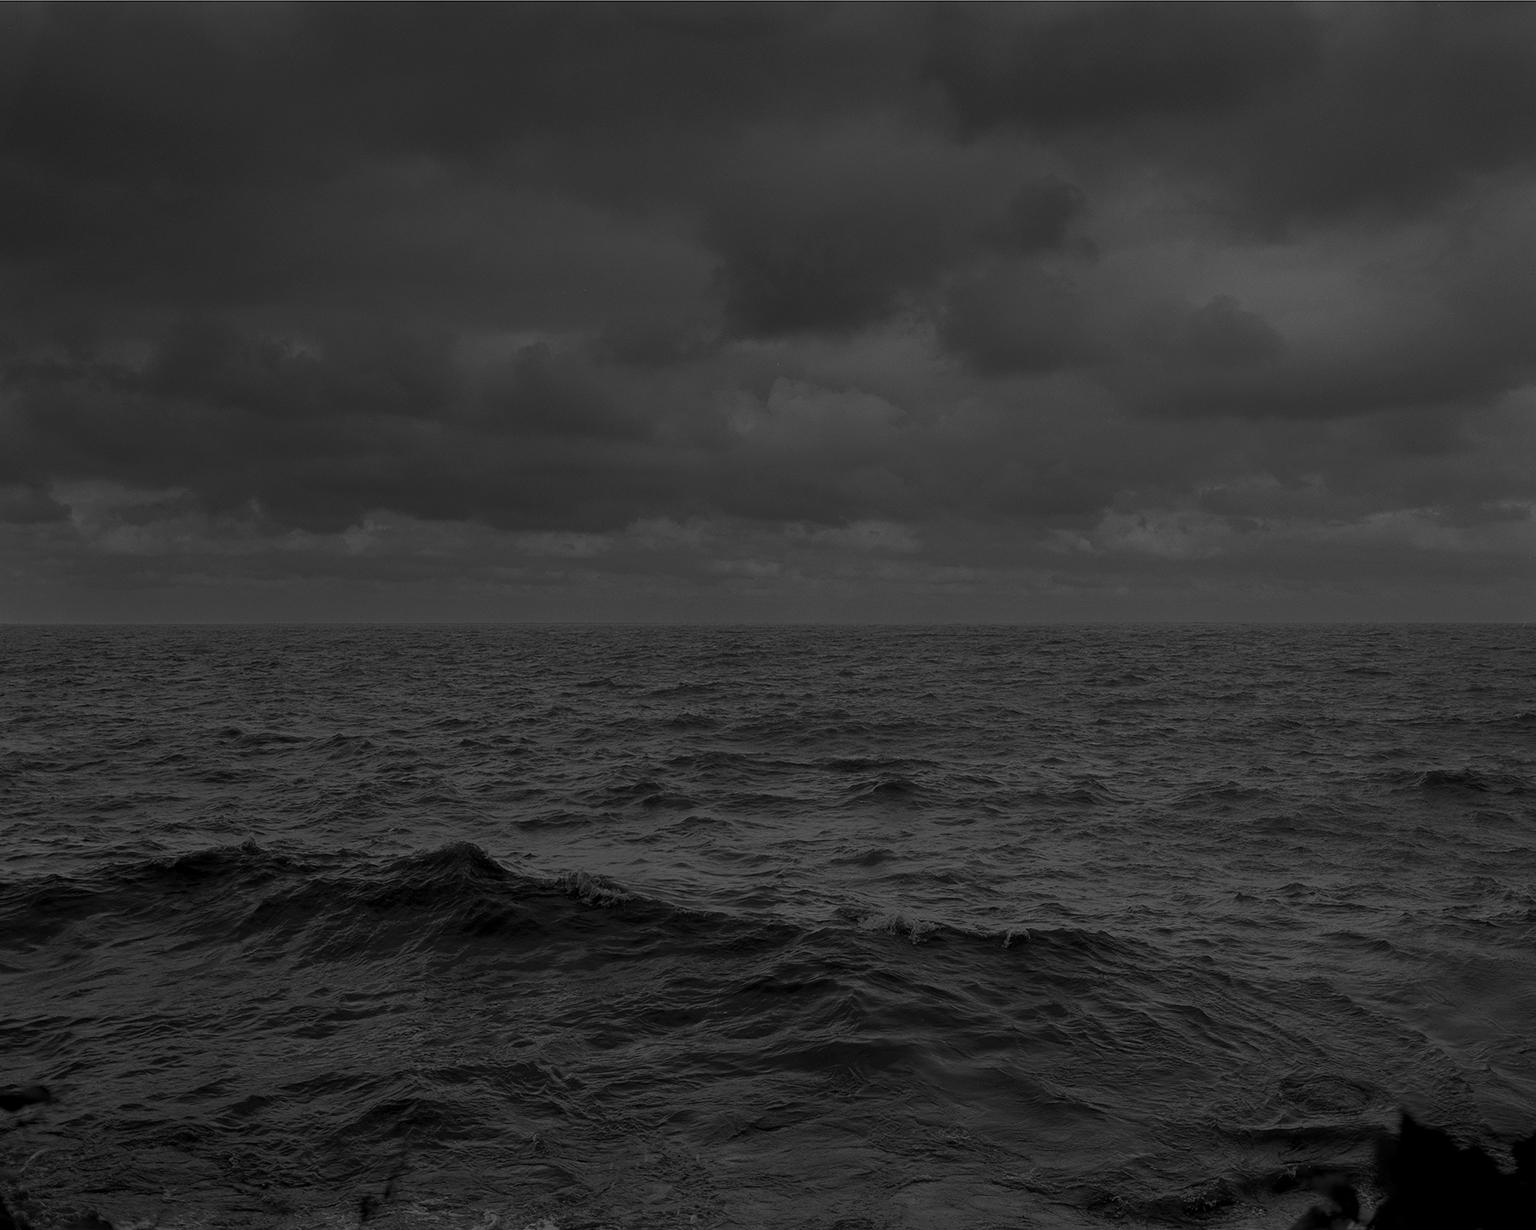 Dawoud Bey. “Untitled #25 (Lake Erie and Sky),” from the series “Night Coming Tenderly, Black,” 2017. Rennie Collection, Vancouver. © Dawoud Bey.